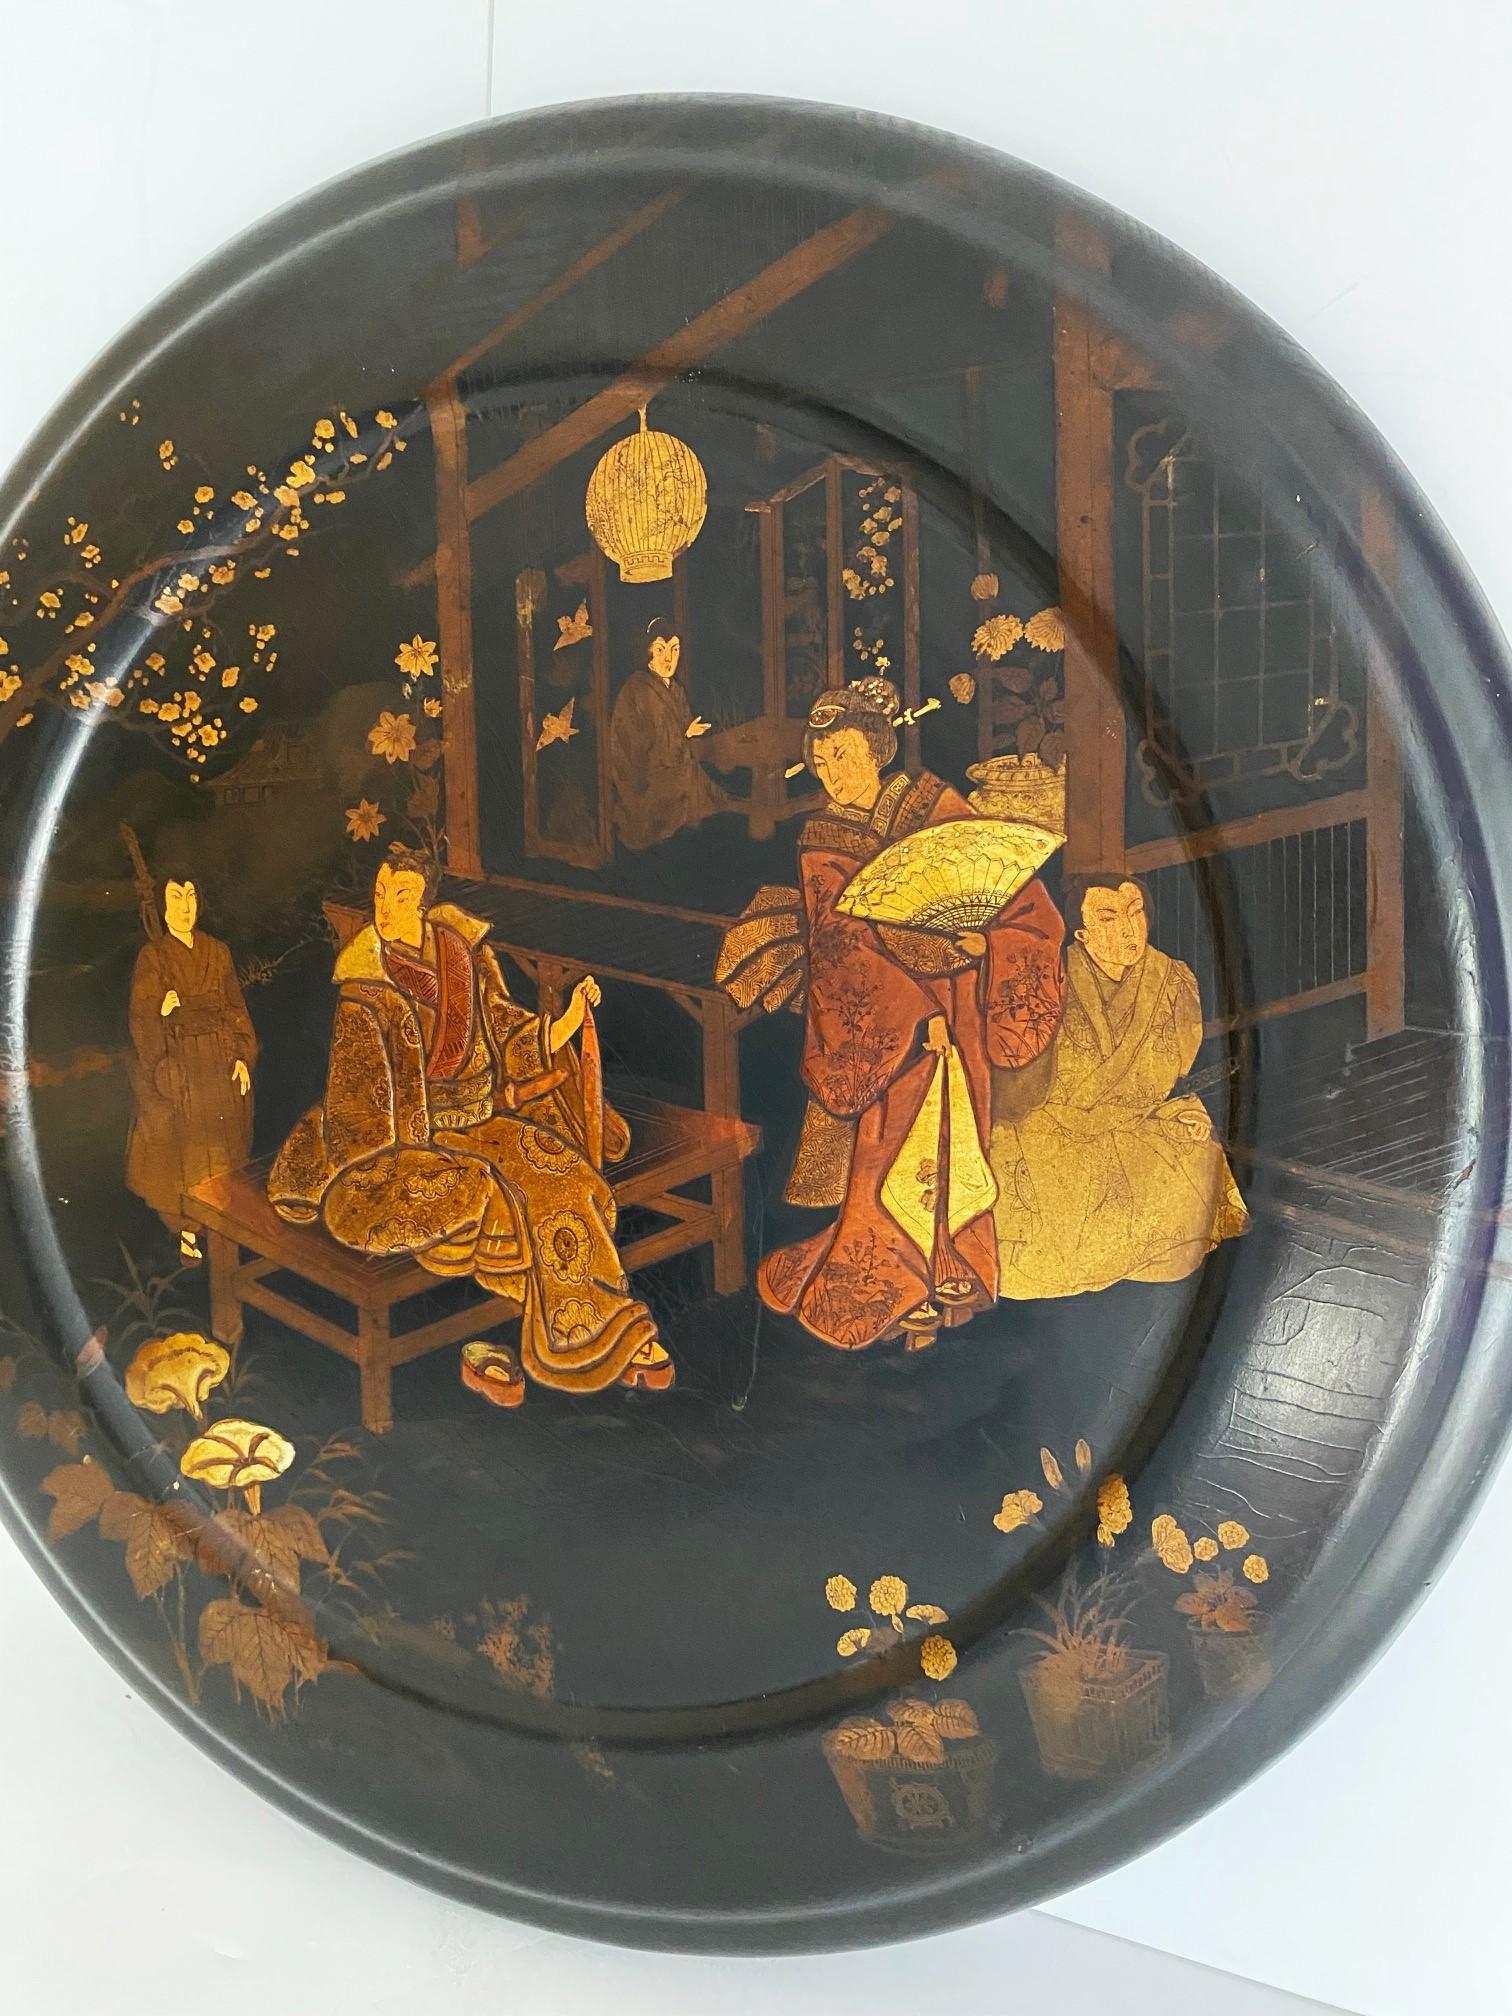  A Japanese Papier Mache Decorative Charger (plate).  Classic Japanese scenes of people in traditional dress.  The bottom edge is missing black lacquer.
